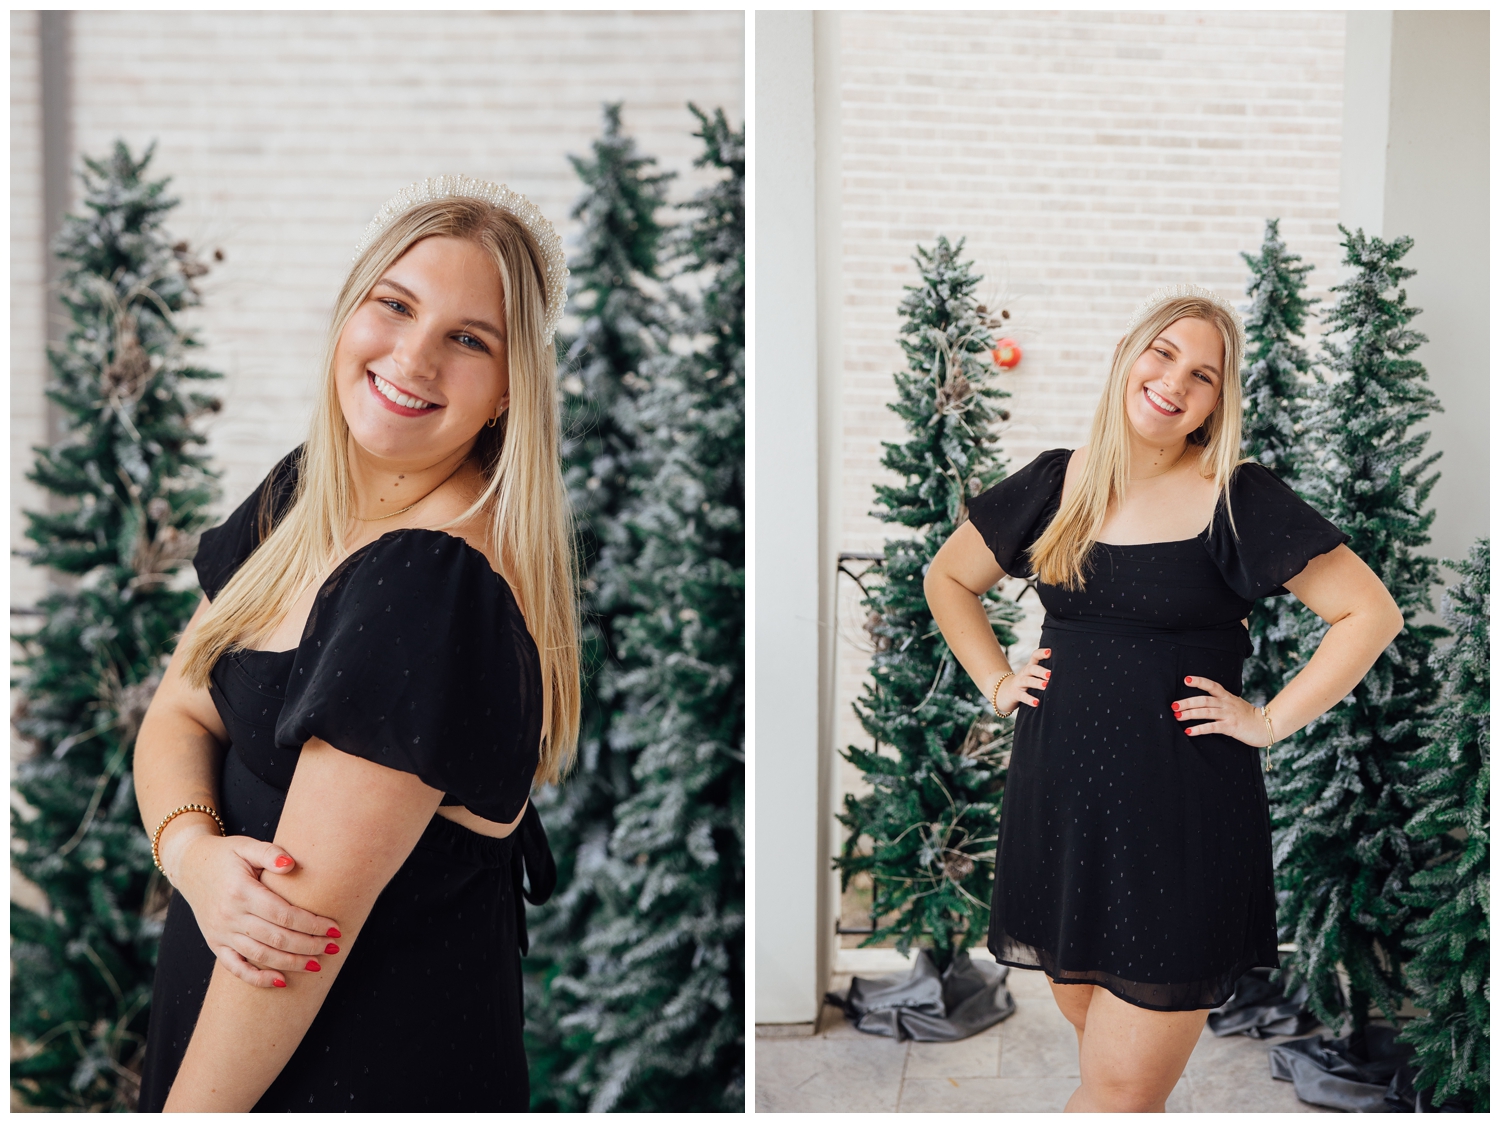 girl in black dress with hands on hips smiling and standing in front of green Christmas tree